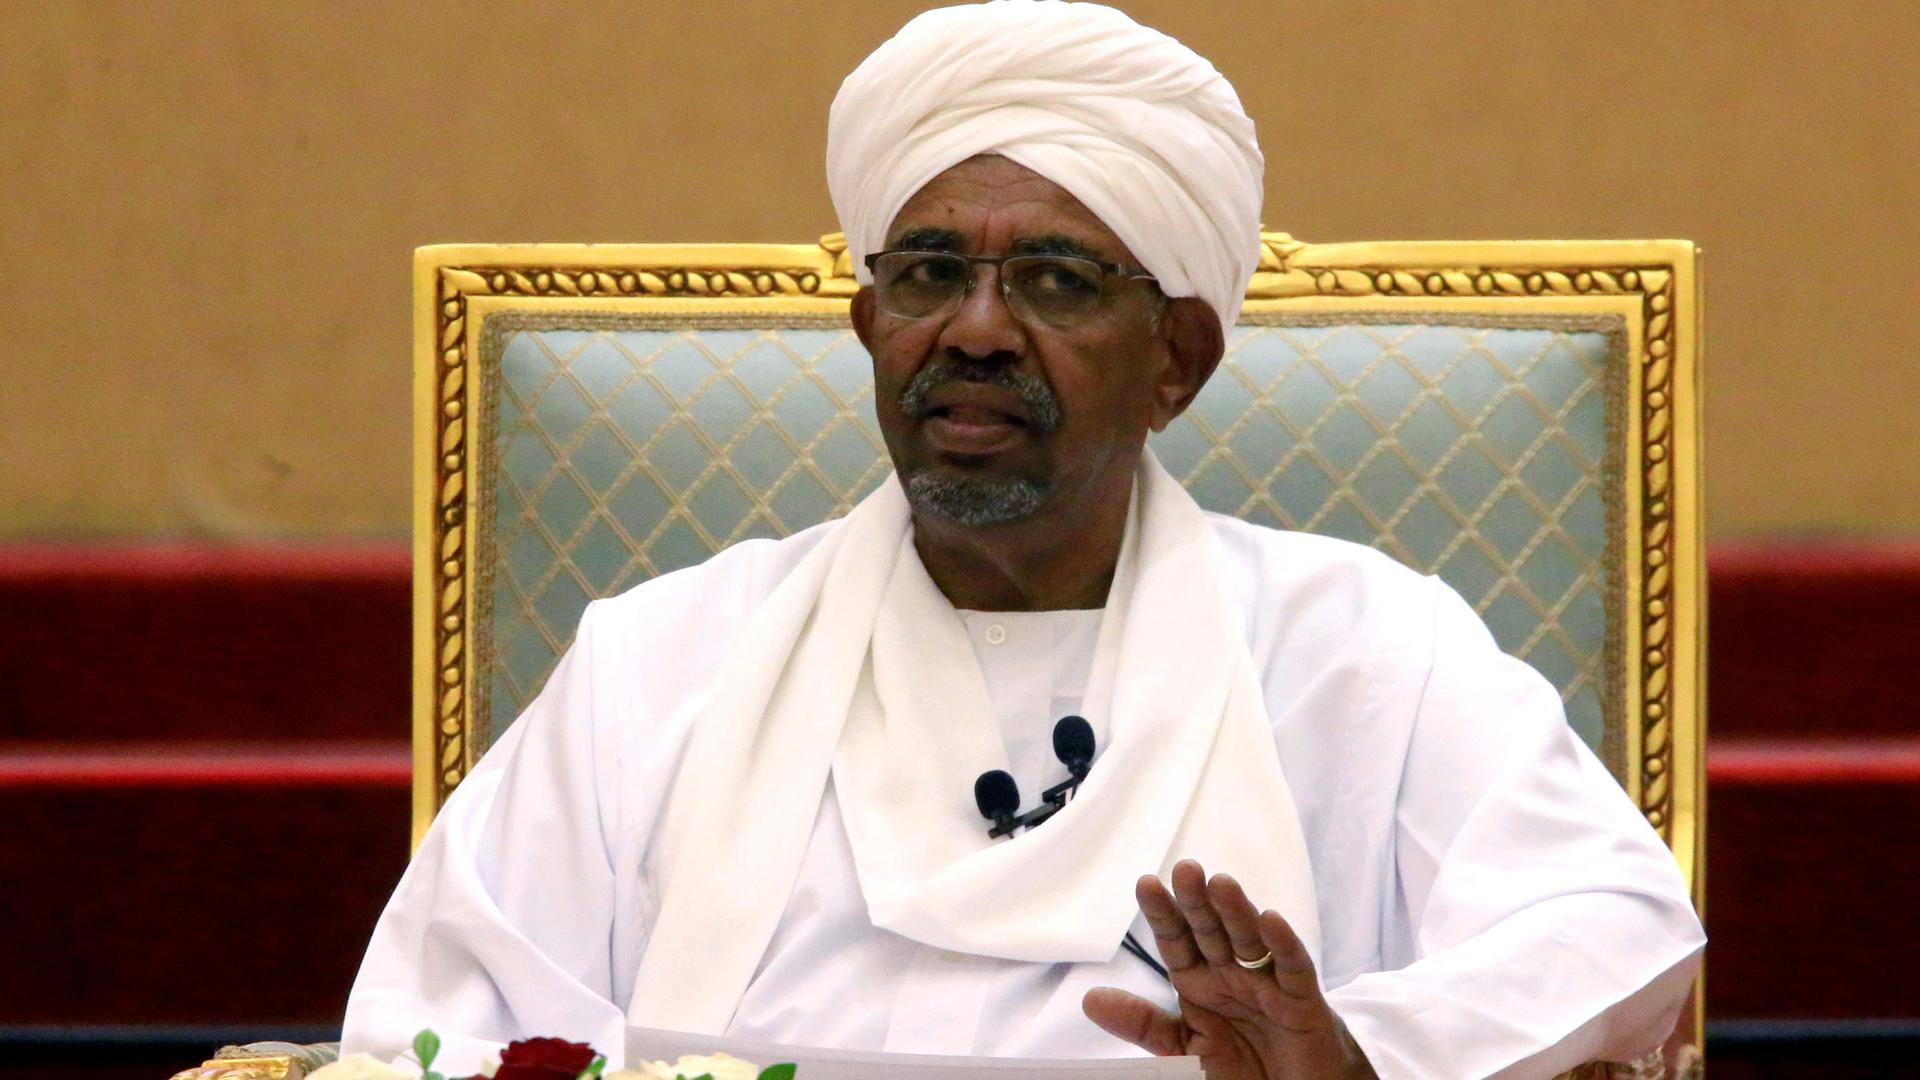 Omar al-Bashir is shown wearing all white while sitting in a chair with his left hand raised slightly. 